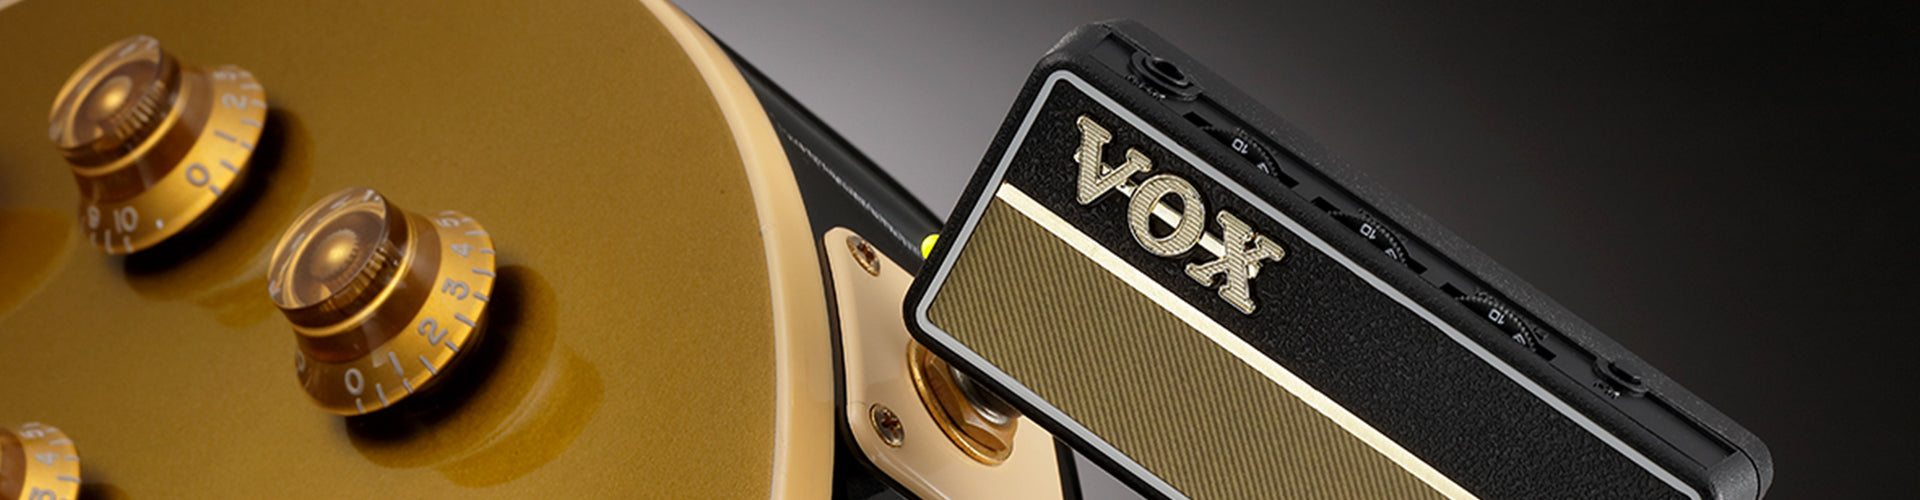 VOX amPlug Collection | Pocket amplifier for practice anytime